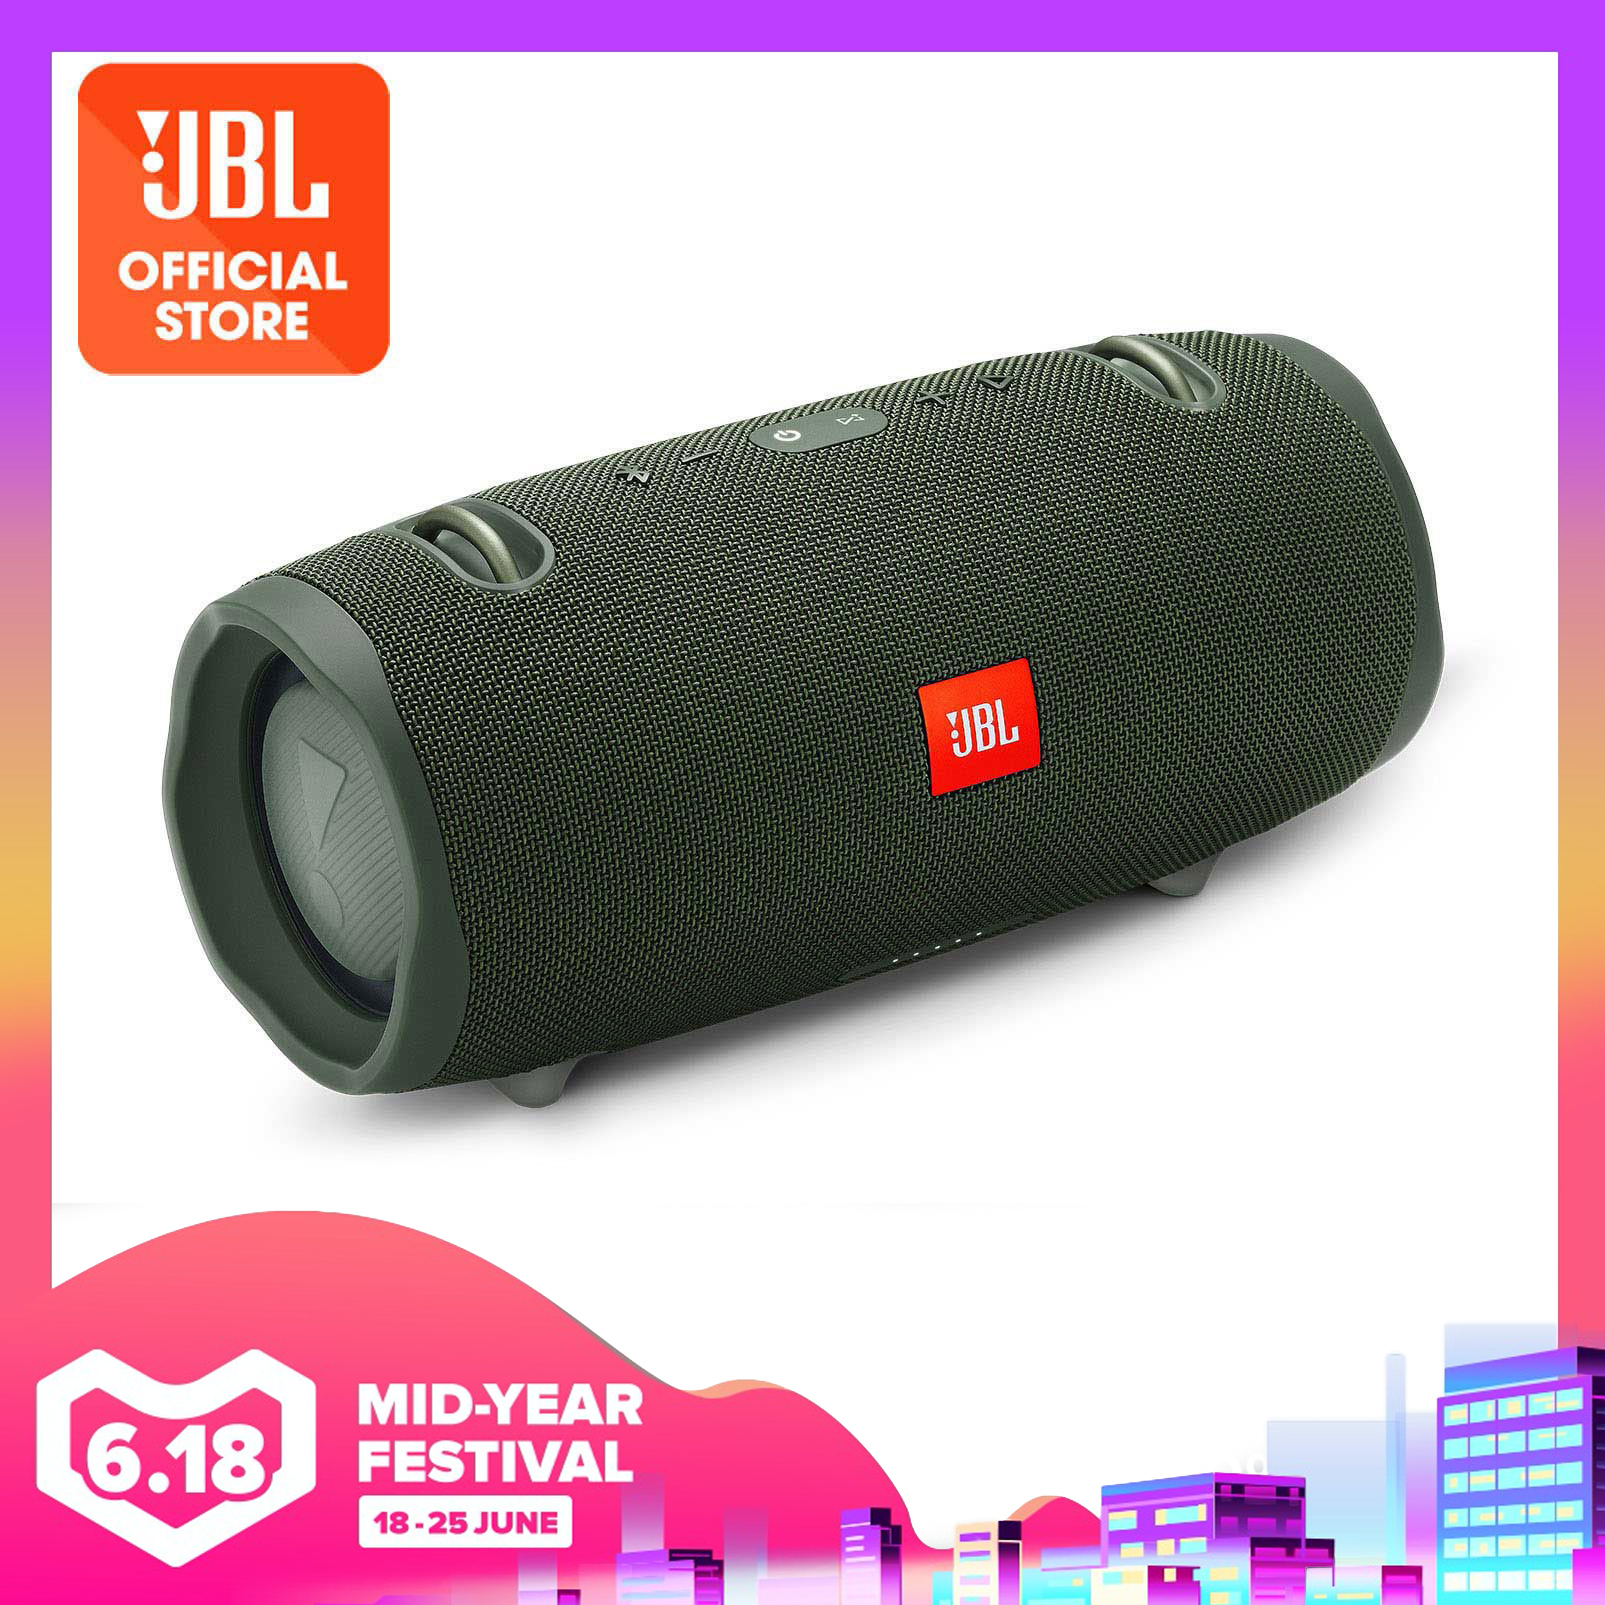 JBL Xtreme 2 IPX7 Waterproof Portable Bluetooth Speaker | Why Not Deals